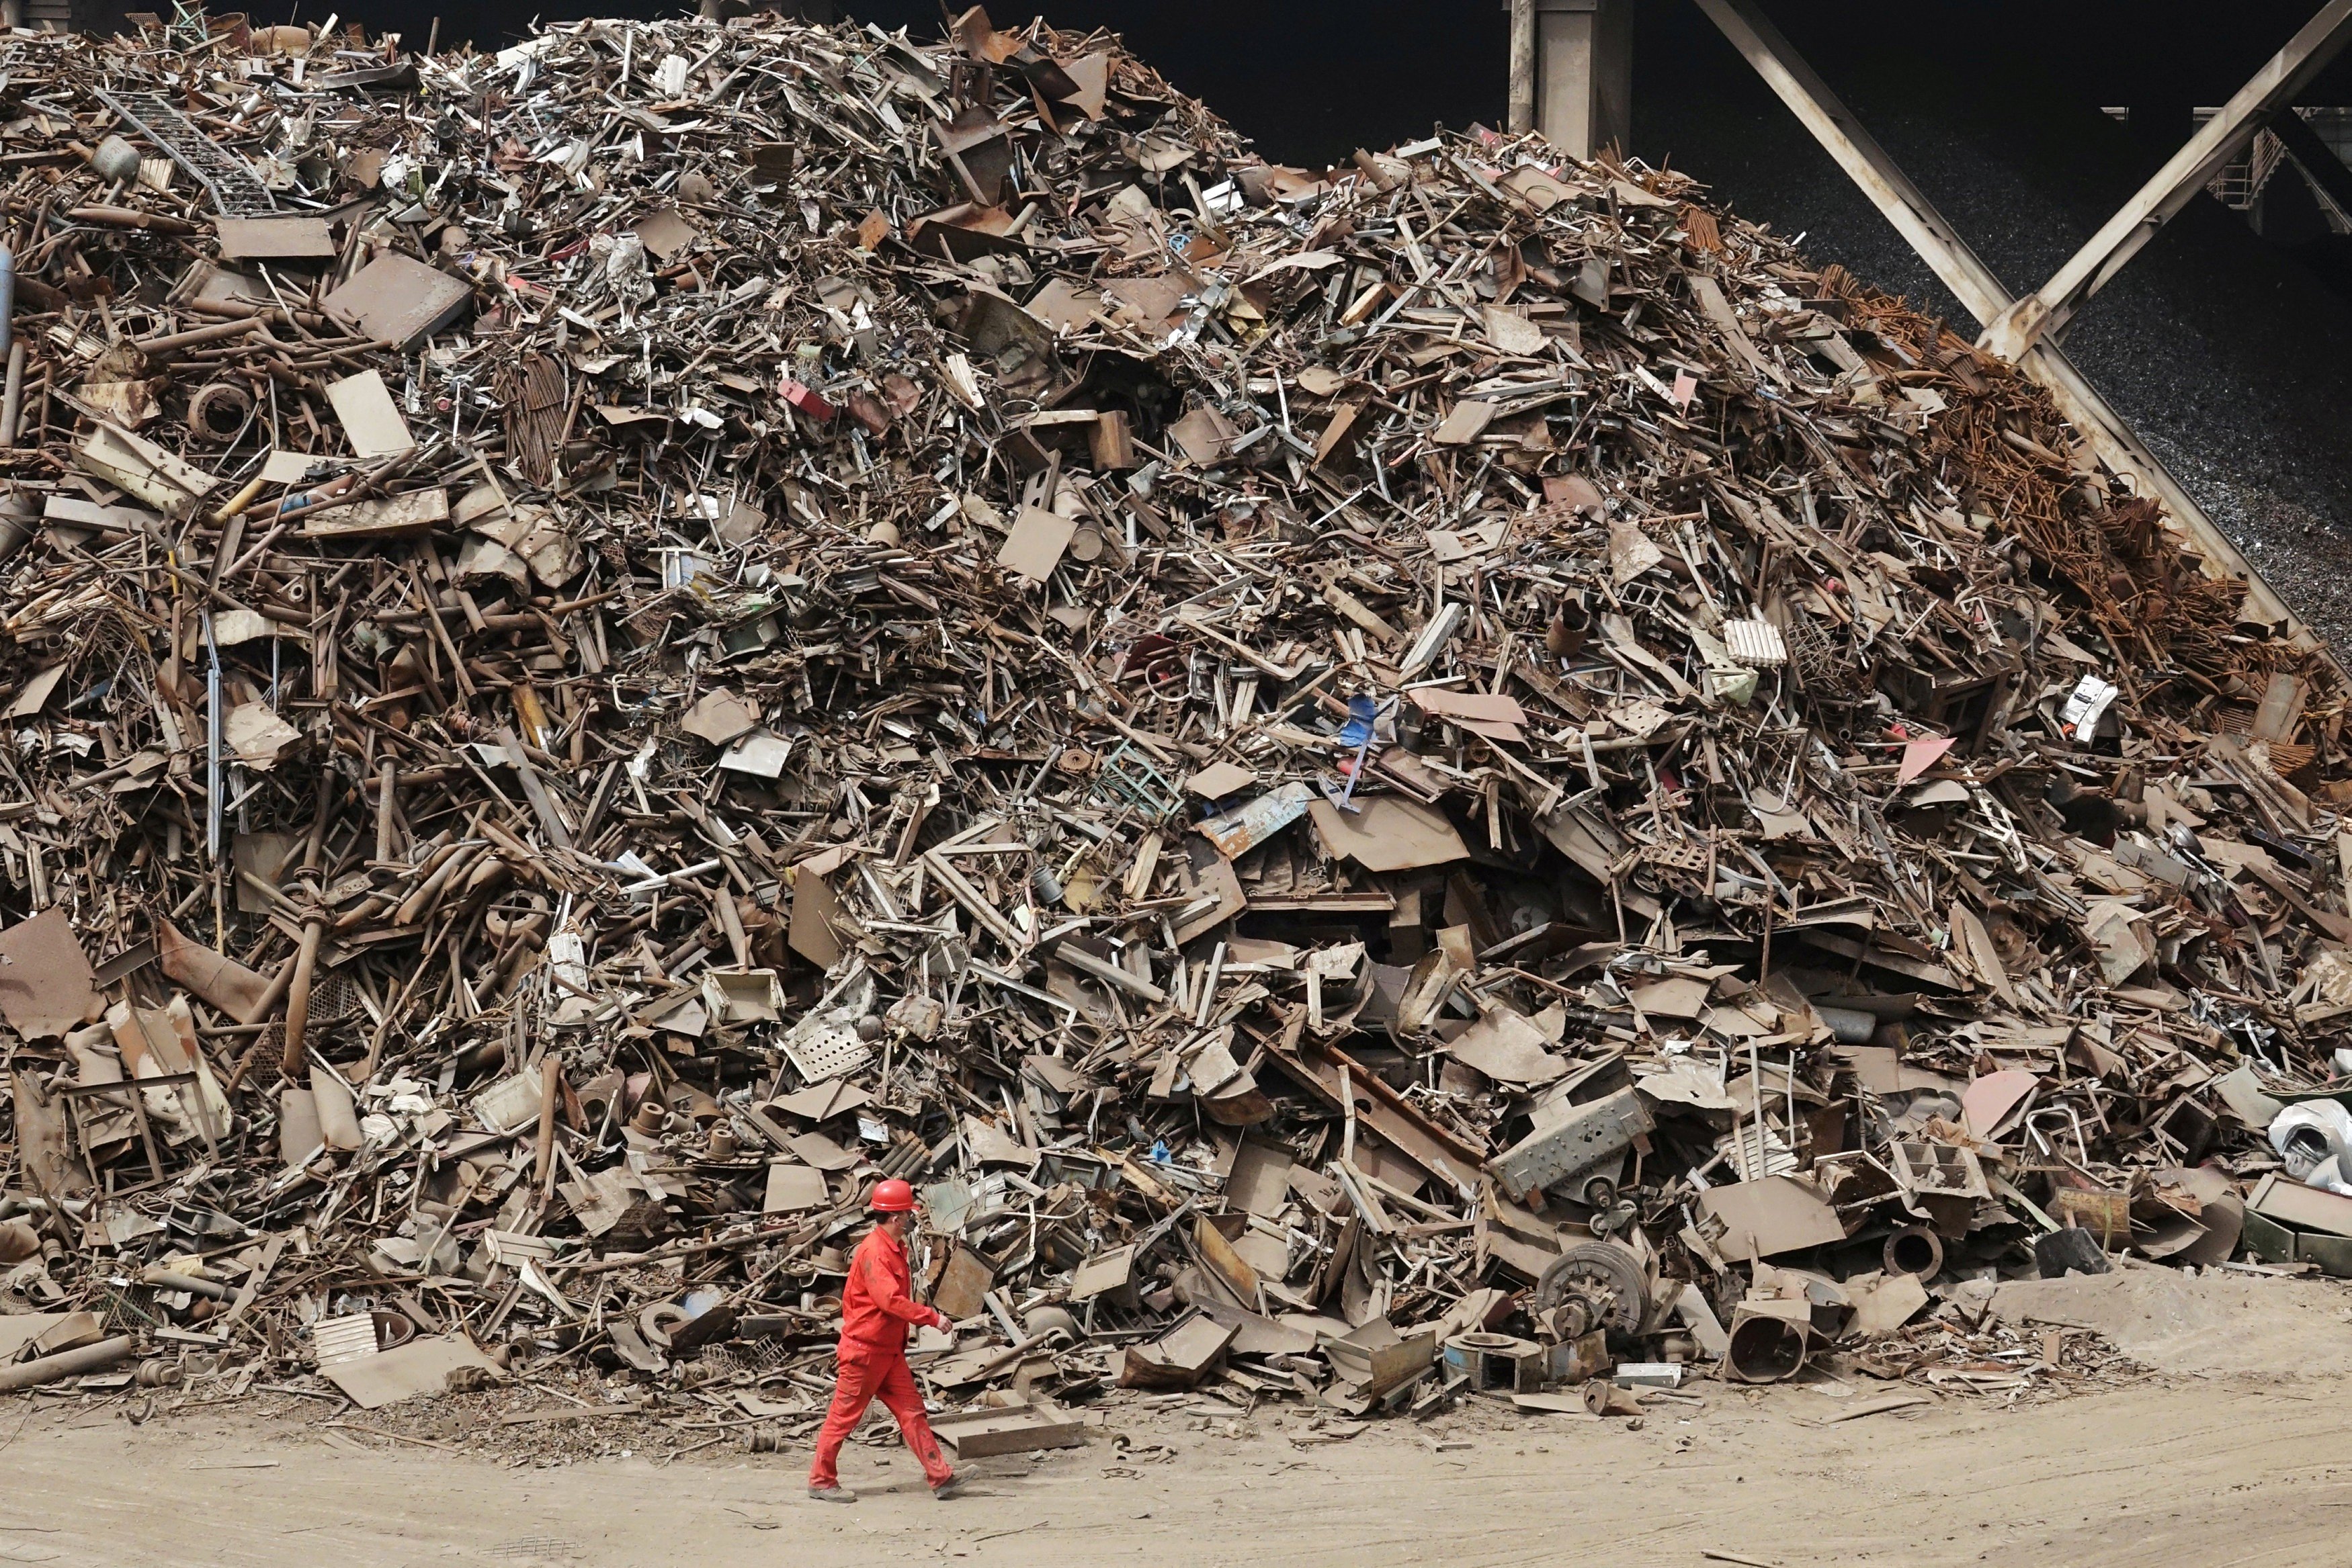 A worker walks past piles of scrap steel at a plant of Dongbei Special Steel Group in Dalian, Liaoning province, in March 2018. The company failed to repay 10 batches of corporate bonds worth US$1 billion from March 2016 onwards, leading to a legal battle between the company and its 1,911 creditors. After a court-ordered “bankruptcy restructuring” plan in which creditors lost 78 per cent of their money, and a windfall from a steel price rally, the company bounced back. Photo: Reuters